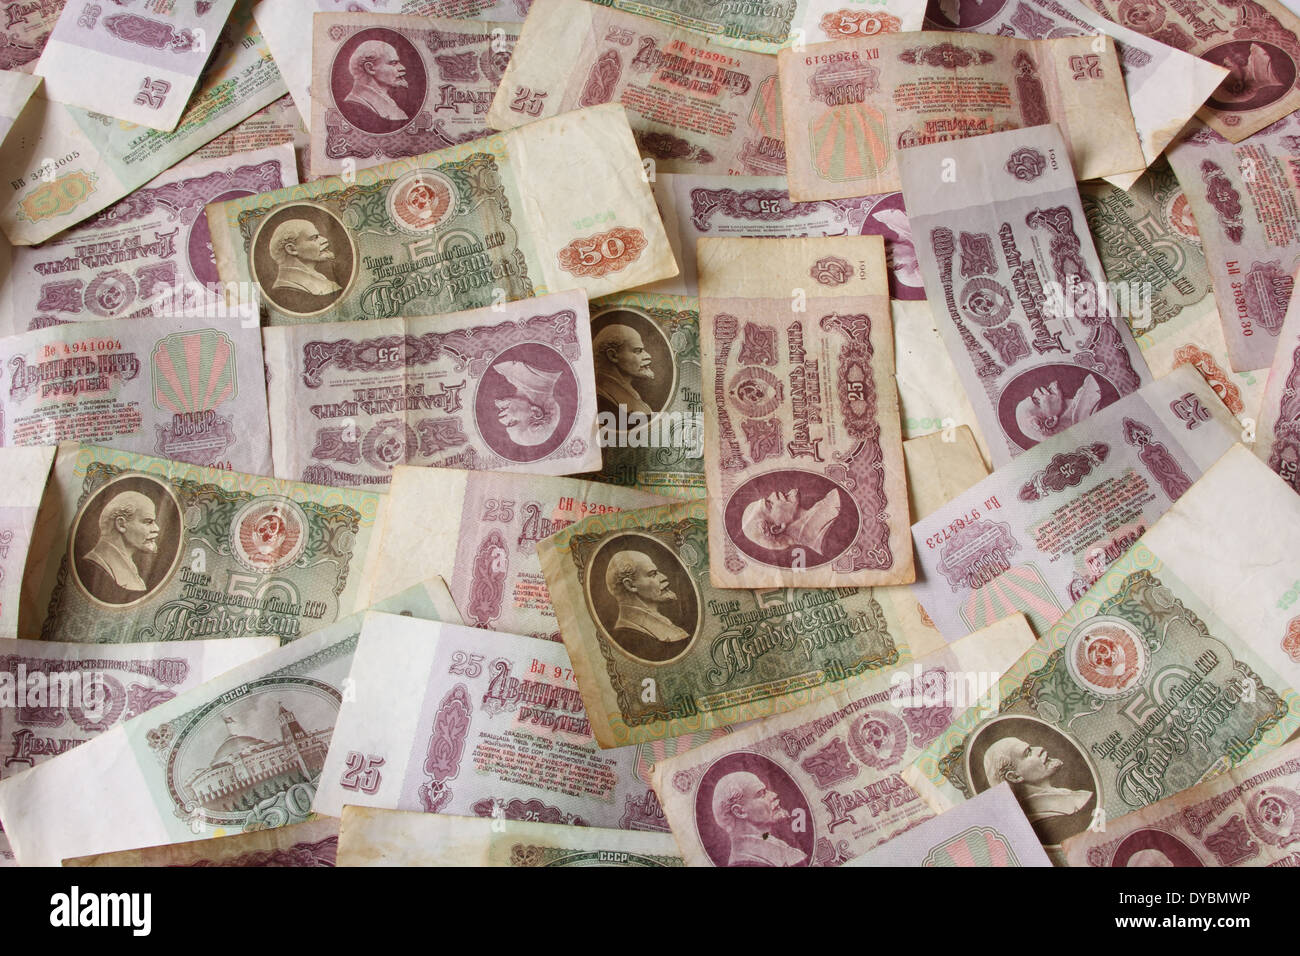 Ruble USSR money, notes 25 and 50 rubles Stock Photo